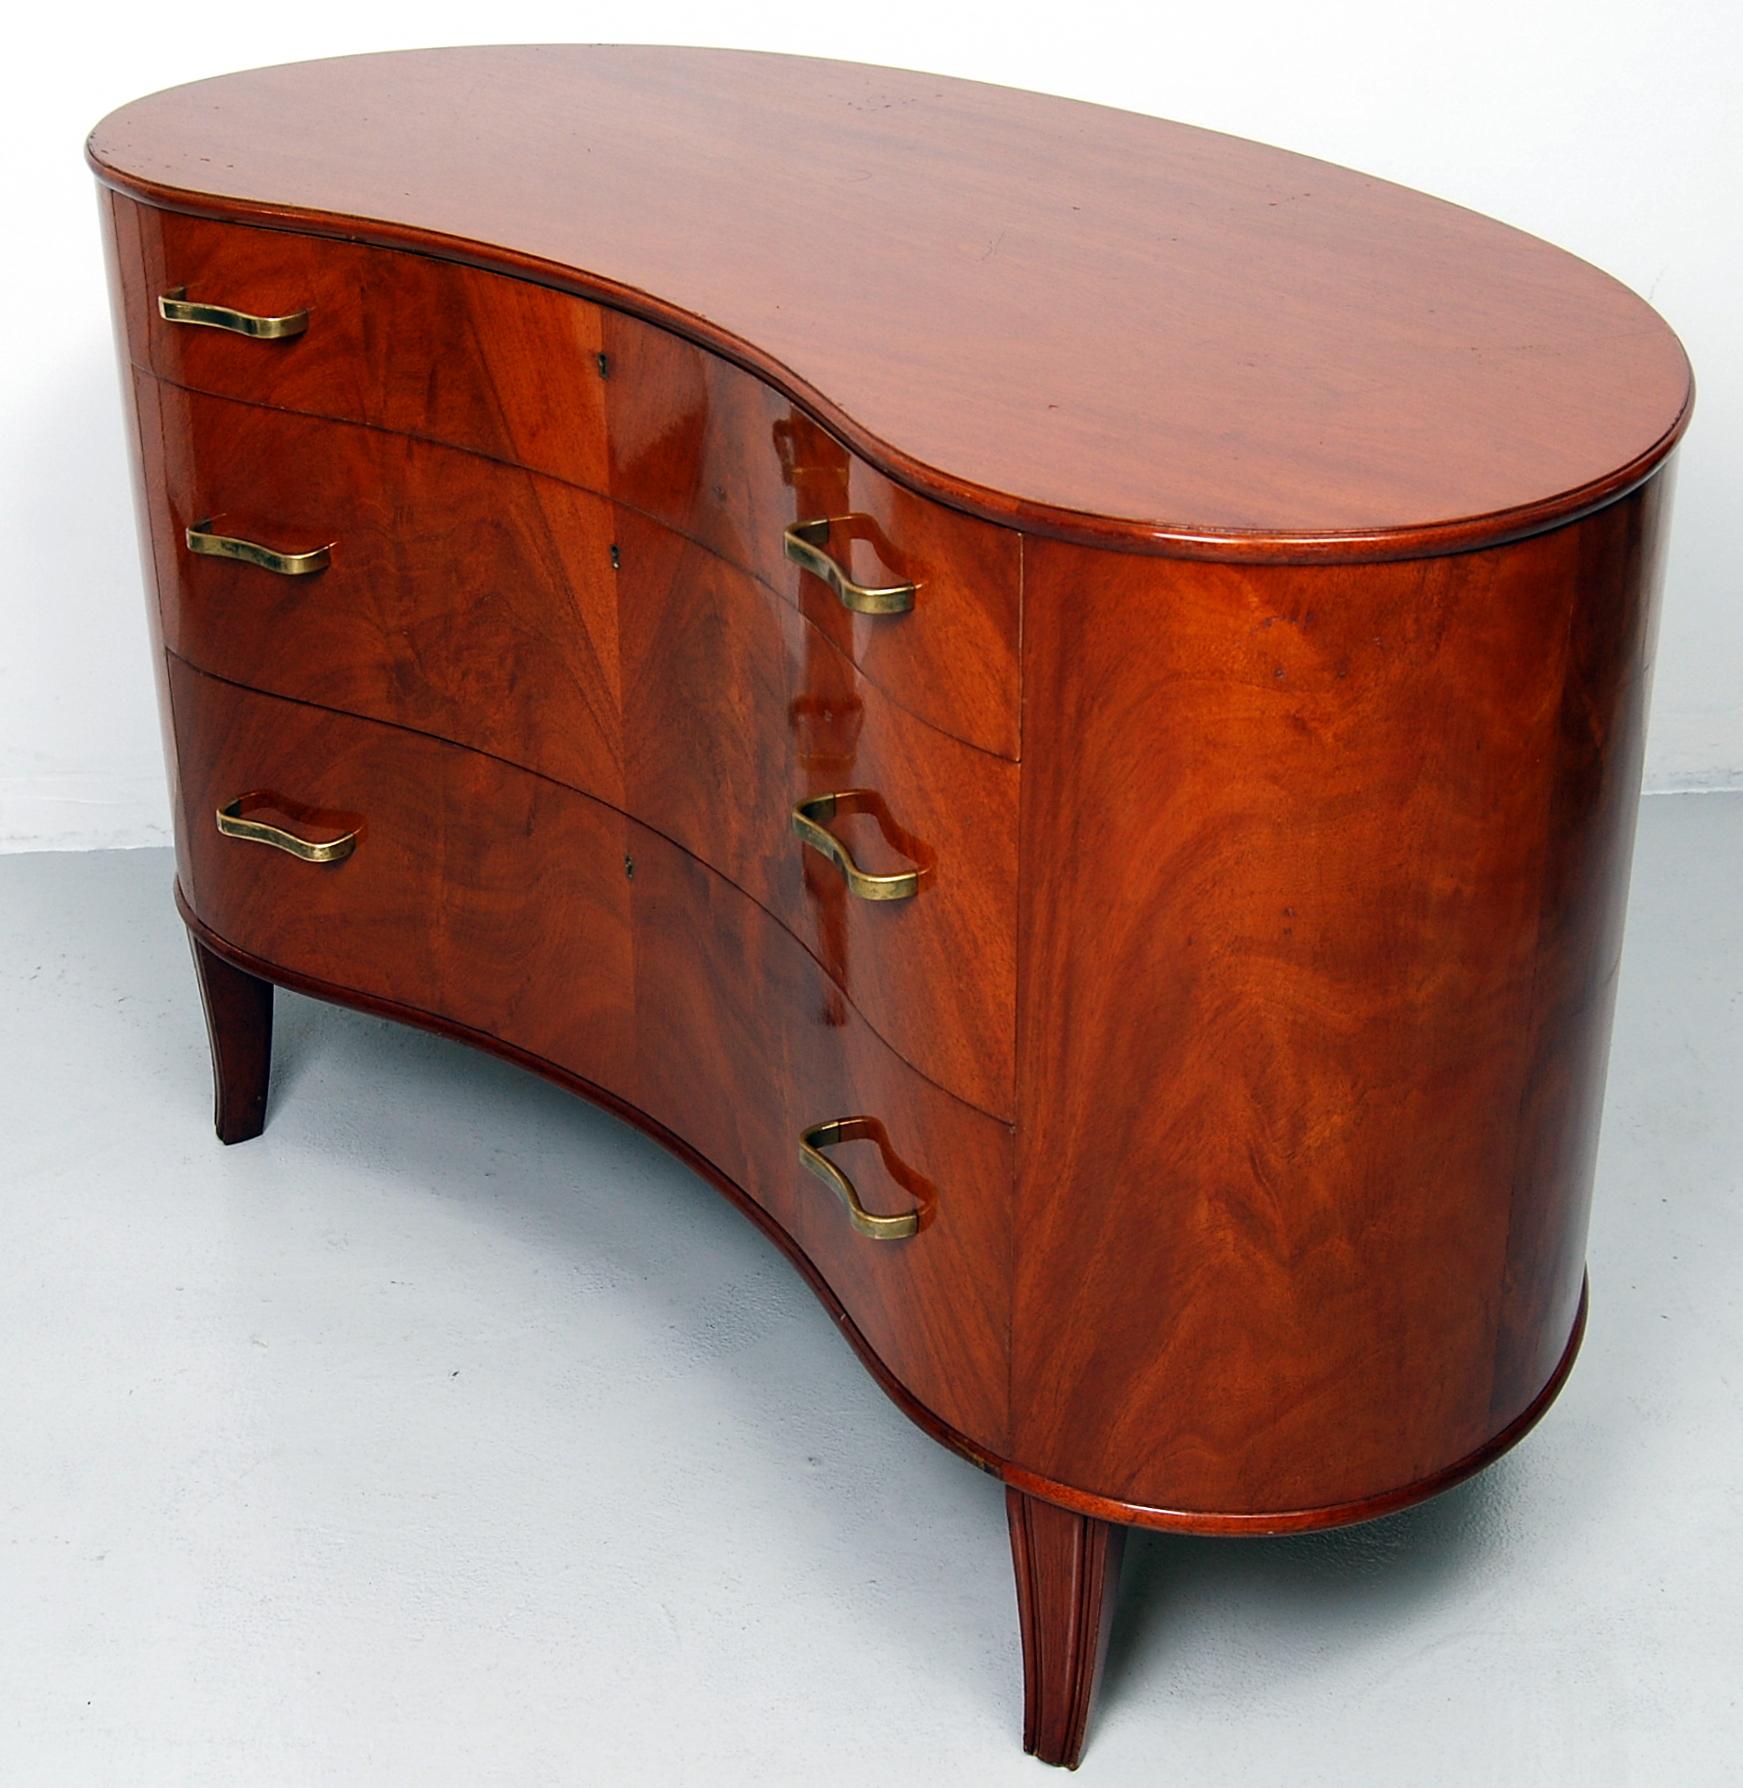 Swedish Chest of Drawers by Axel Larsson for SMF Bodafors Sweden, 1940s